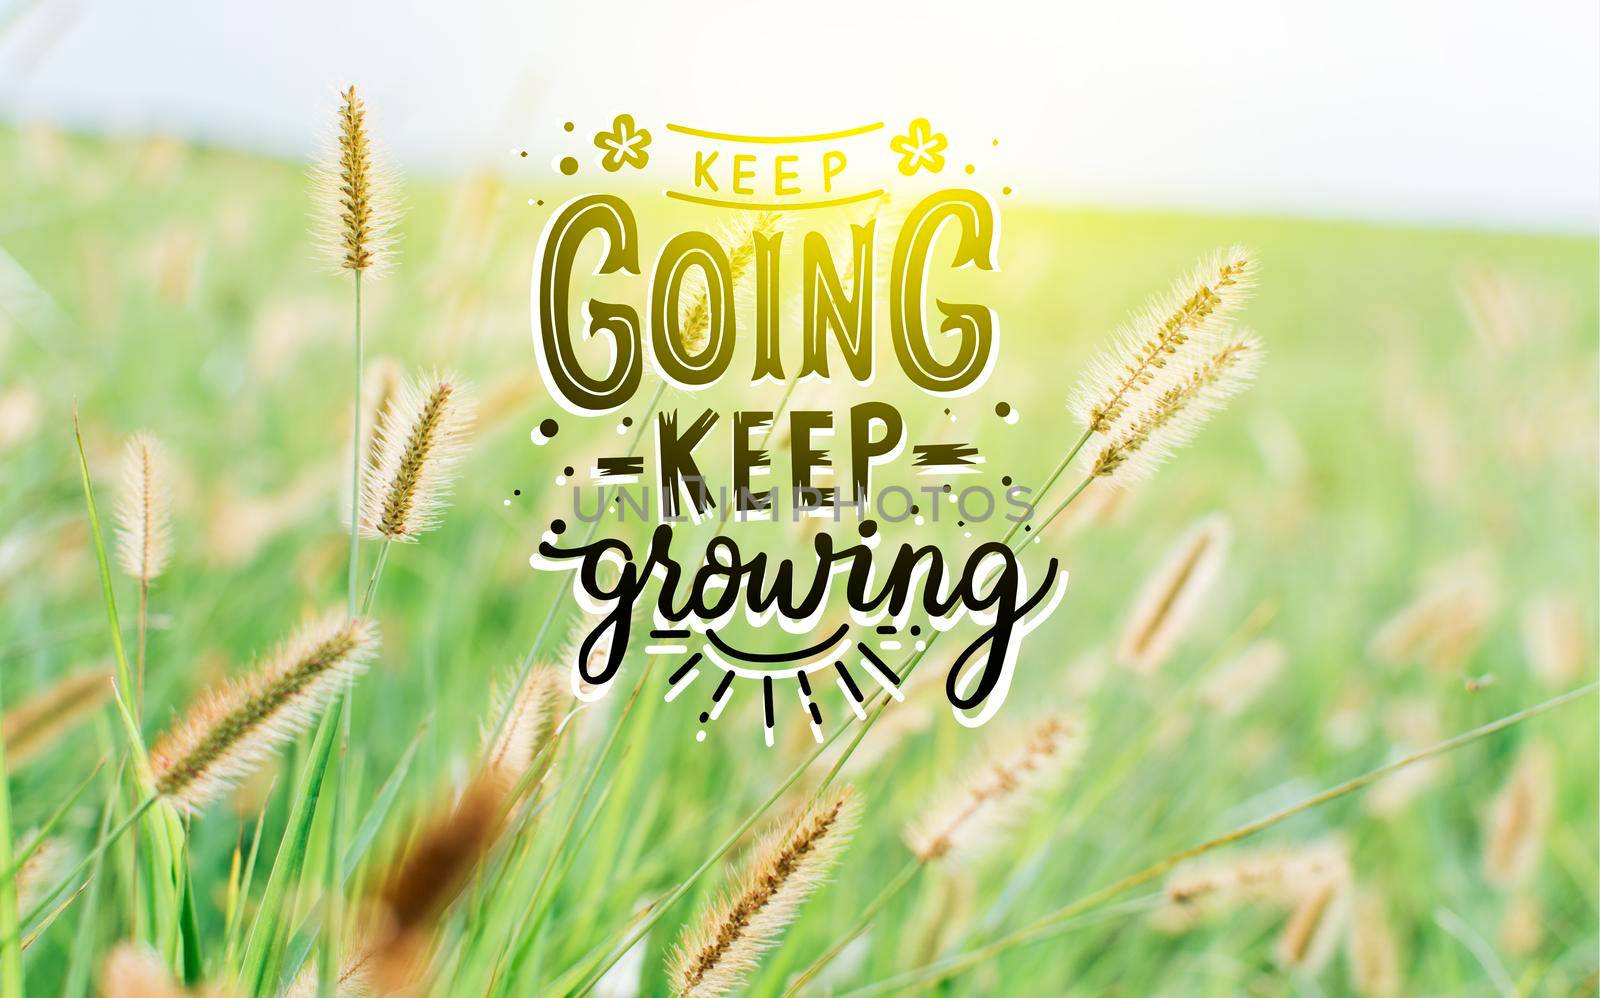 motivational quotes, keep going keep growing, motivational messages keep going, keep growing, motivational phrases of encouragement